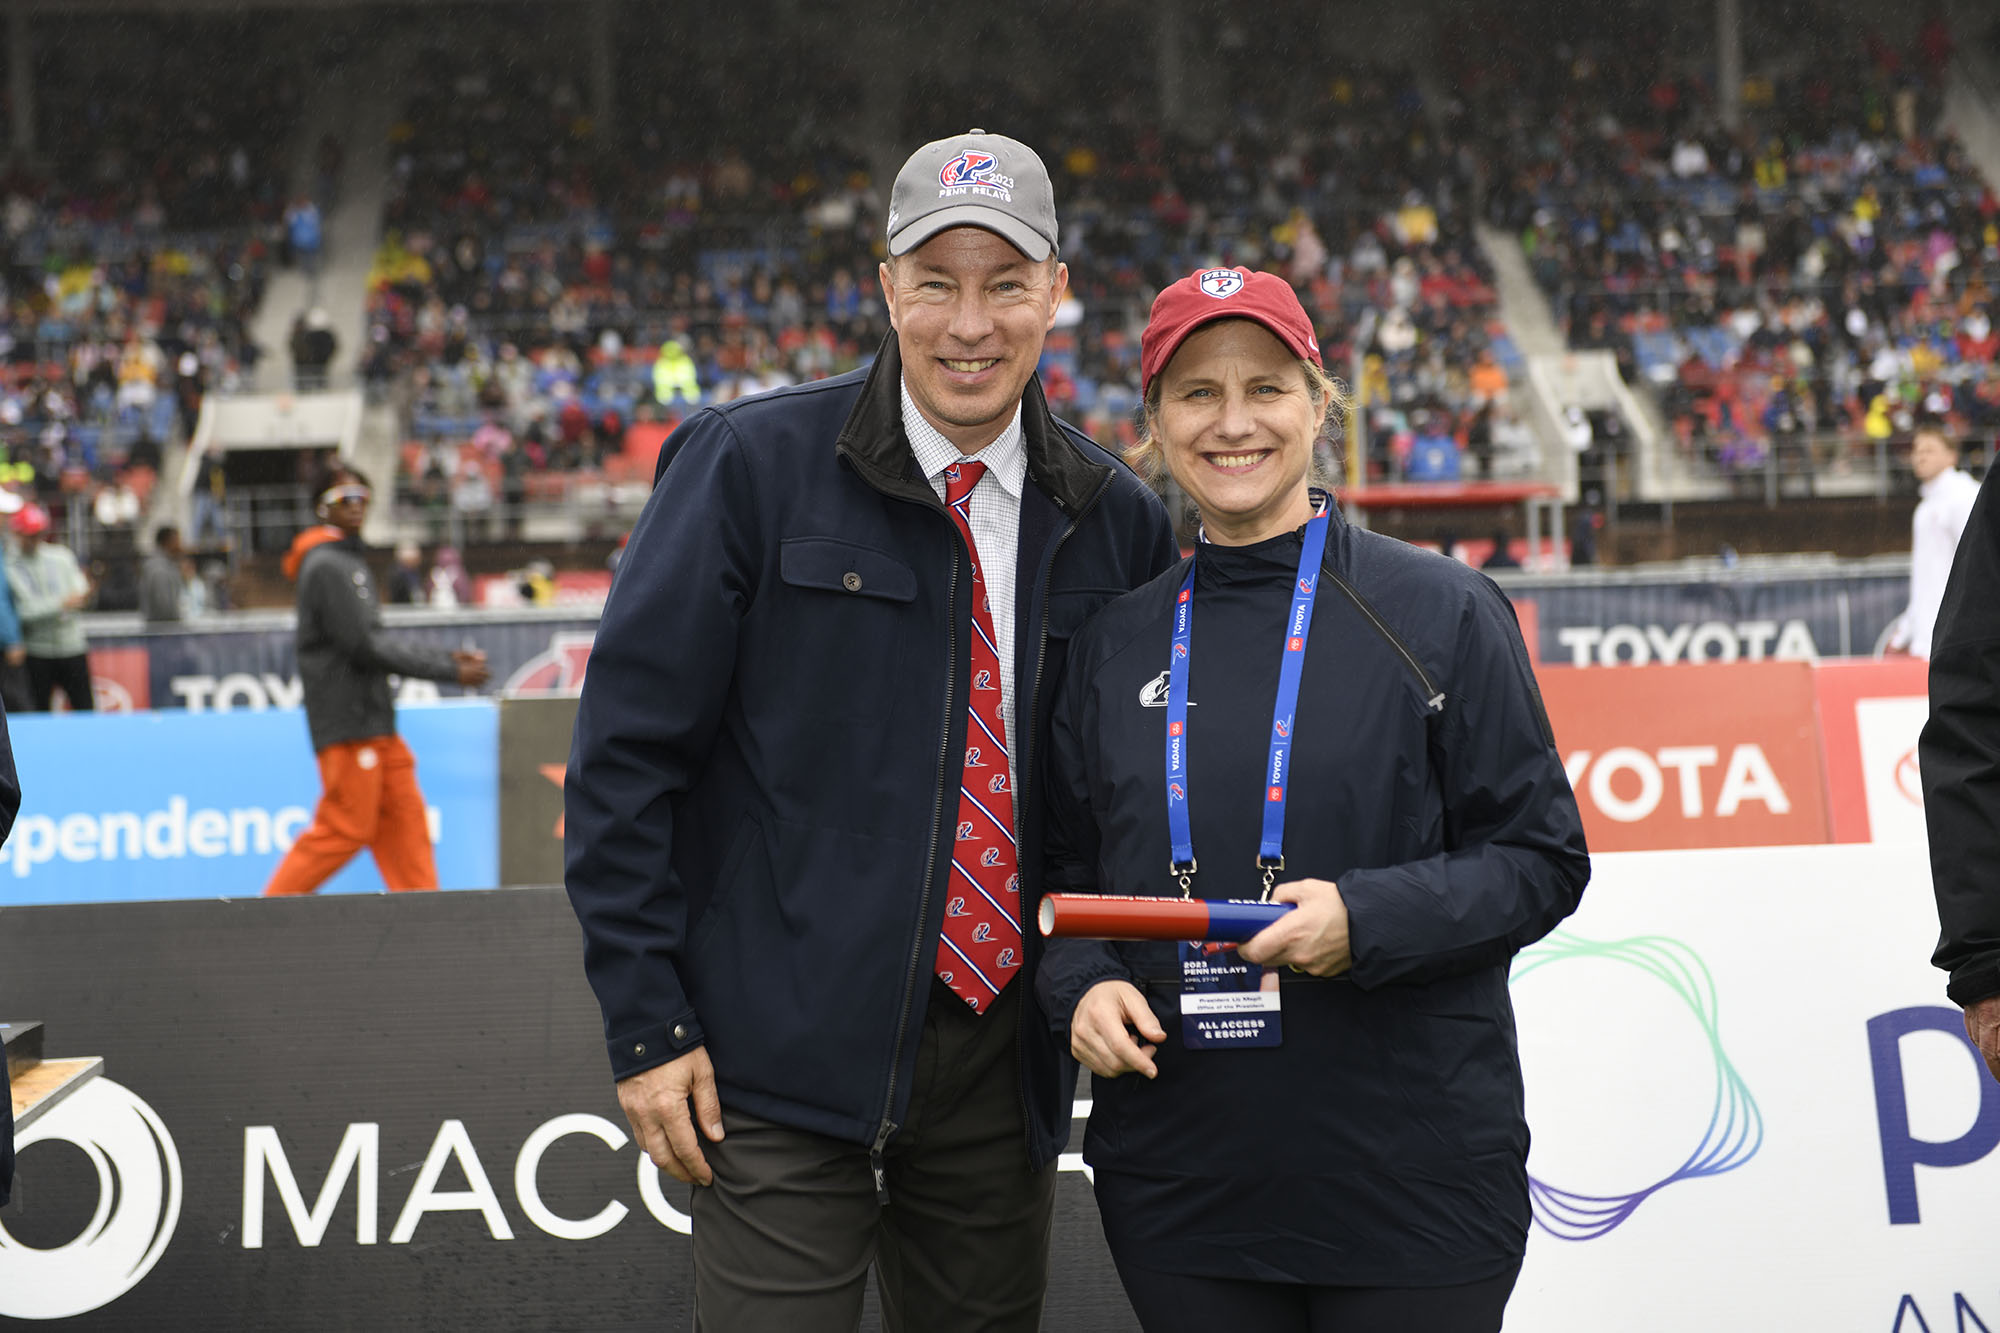 Steve Dolan, the James P. Tuppeny/Betty J. Costanza Director of Track & Field/Cross Country, and President Liz Magill at the Penn Relays.